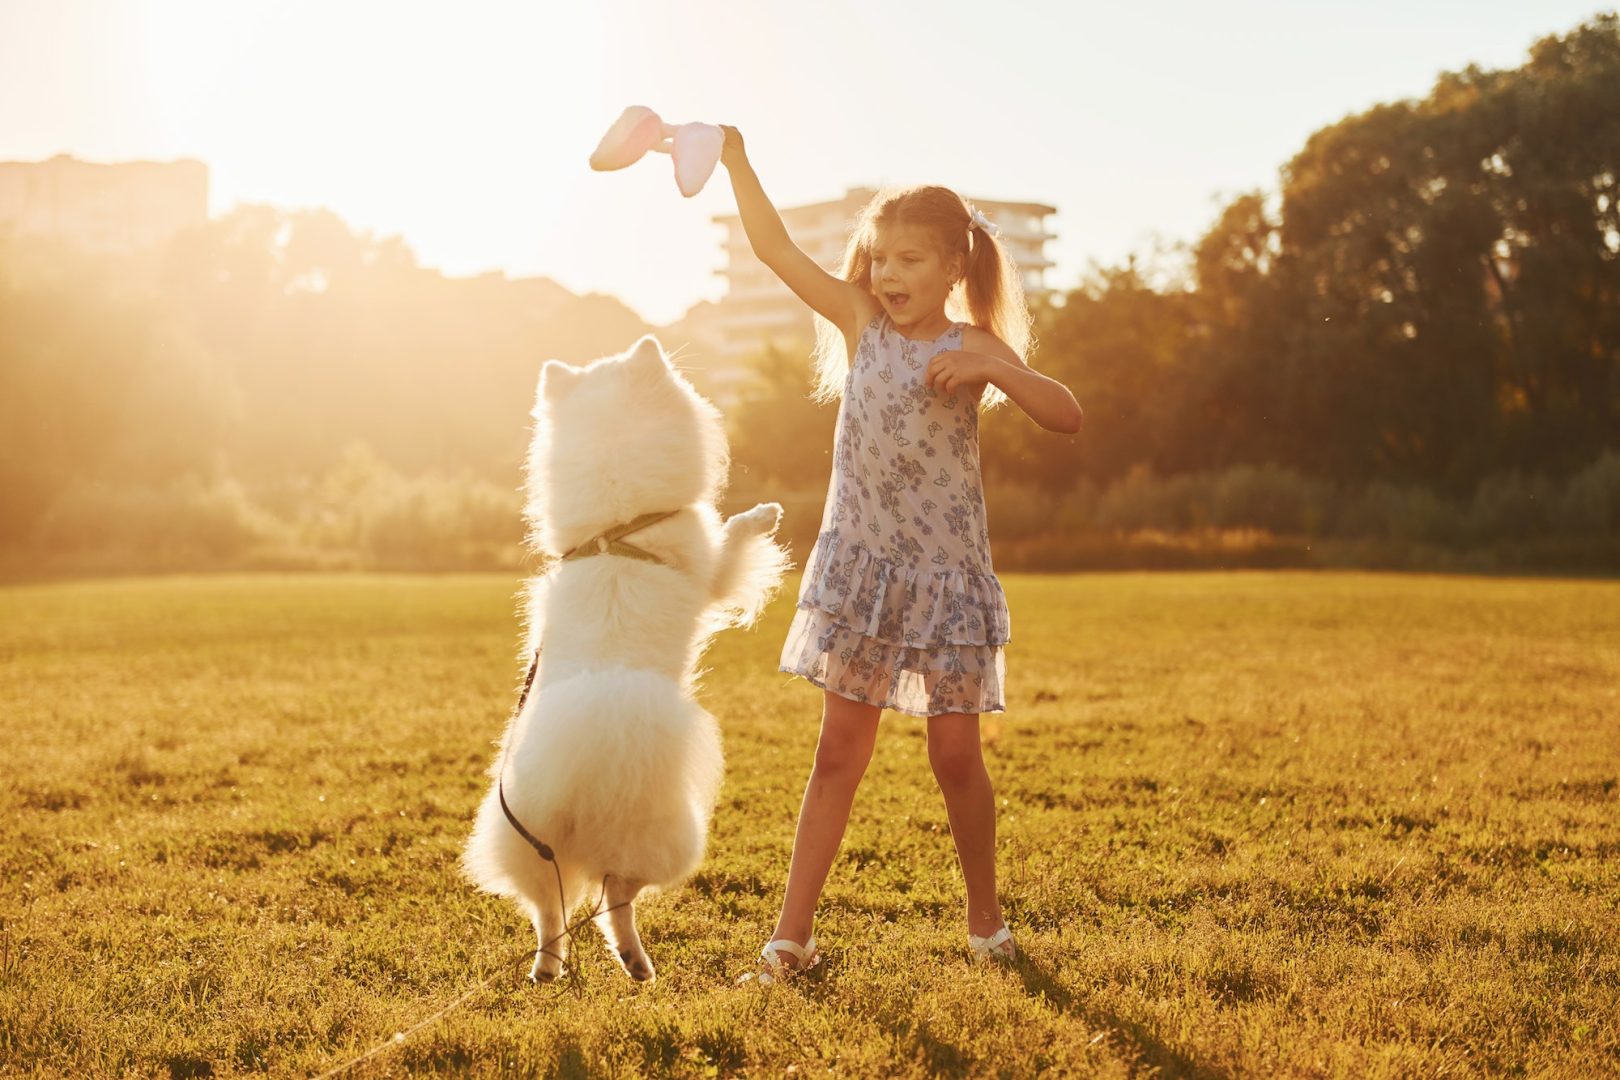 Summertime leisure activities. Little girl with her dog is having fun on the field at sunny daytime